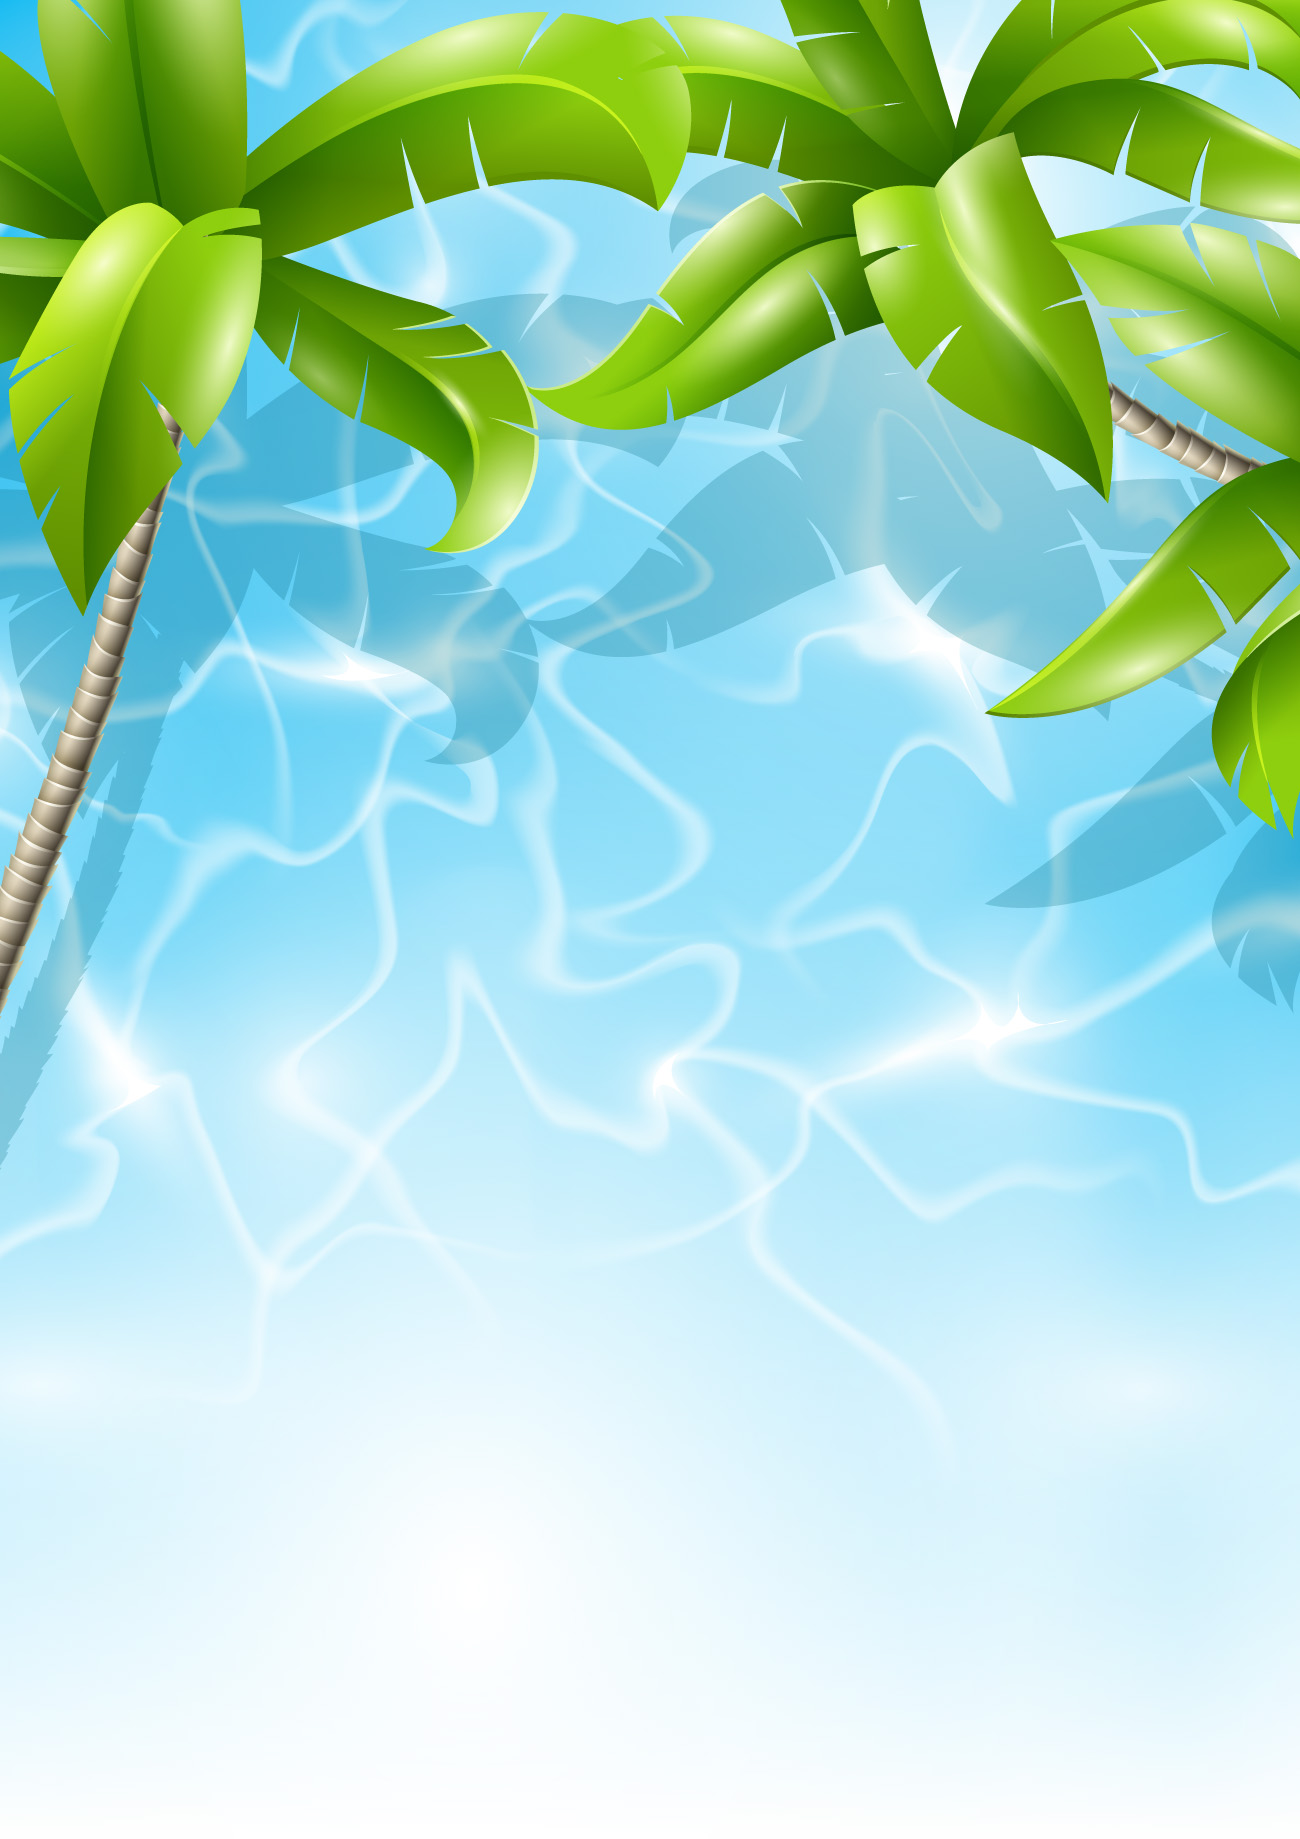 Beautiful Tropical Backgrounds vector 01 - Vector Background free download